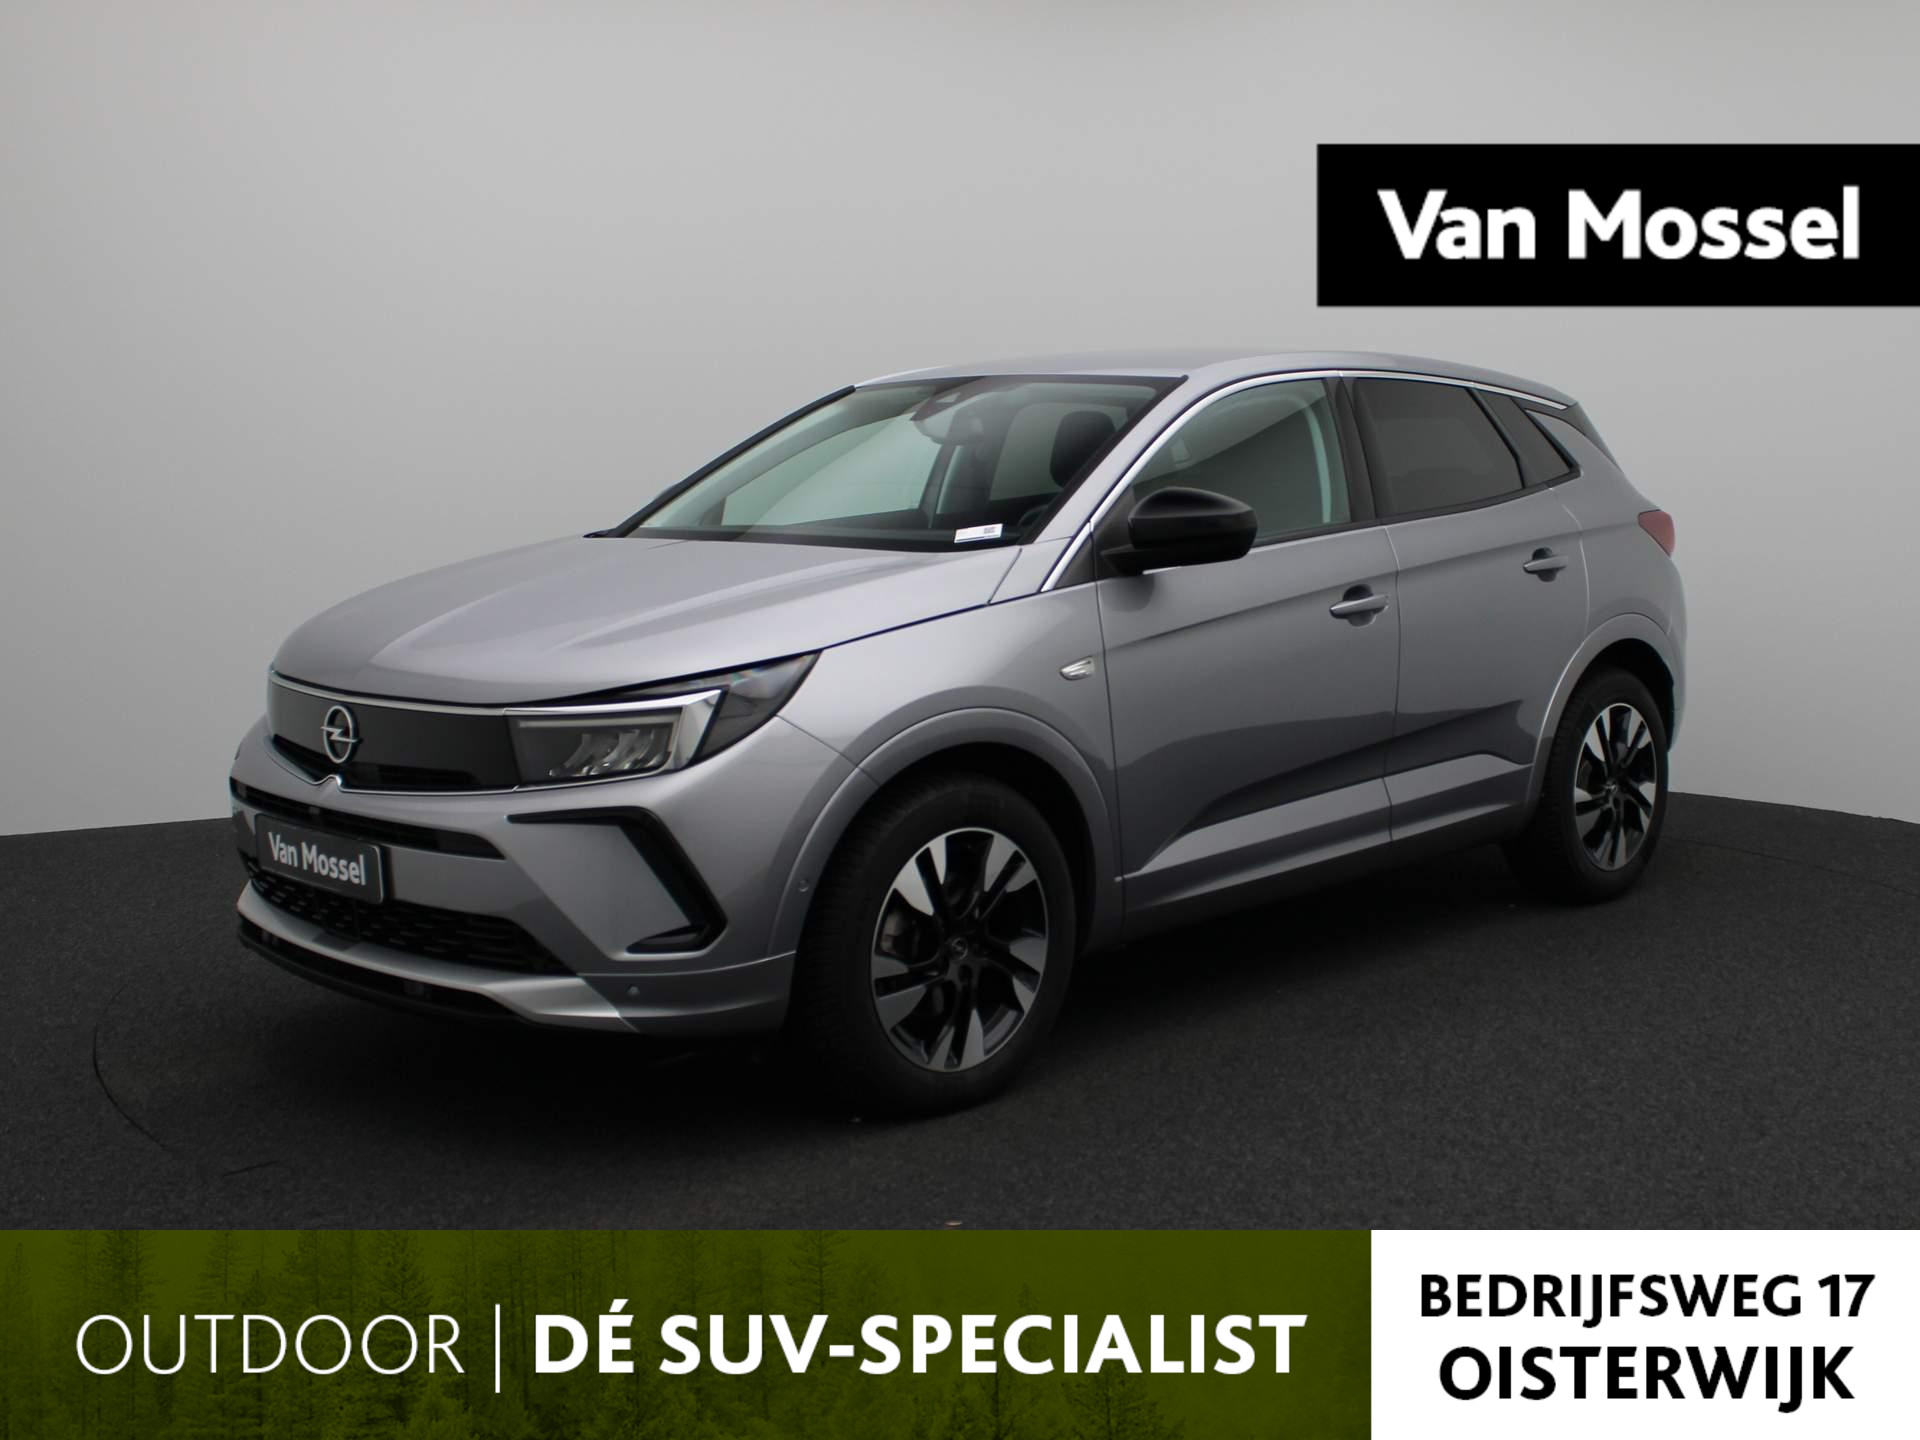 Opel Grandland 1.2 Turbo Business Edition | AUTOMAAT | NAVIGATIE | ACHTERUITRIJCAMERA | CLIMATE CONTROL | CRUISE CONTROL | LED KOPLAMPEN | APPLE CARPLAY / ANDROID AUTO |